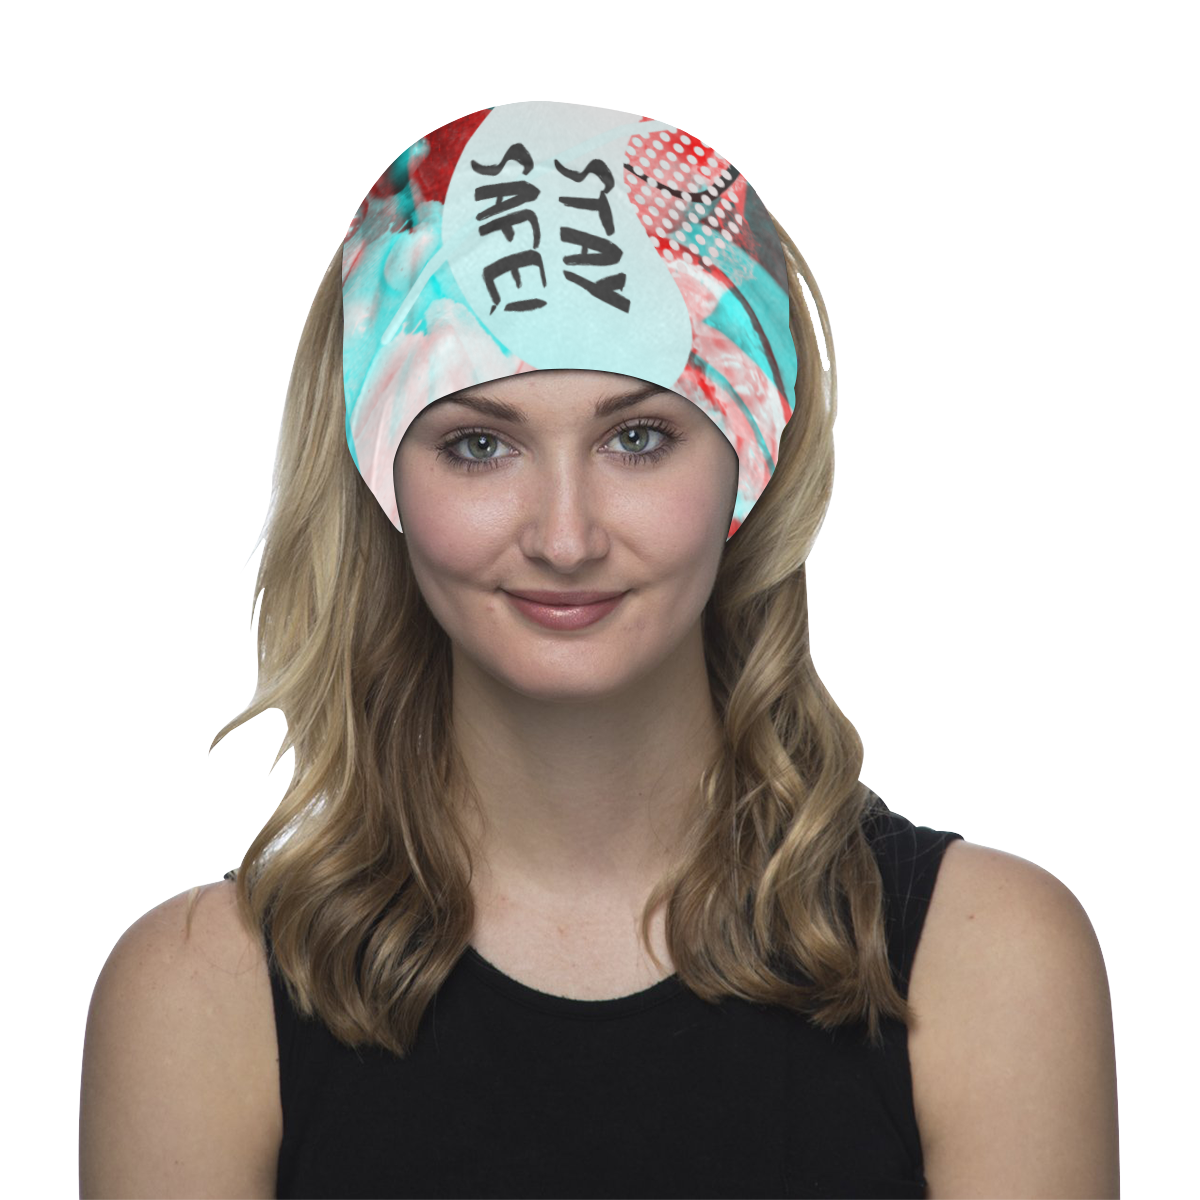 stay safe - glitch - turquose and red edition Multifunctional Headwear